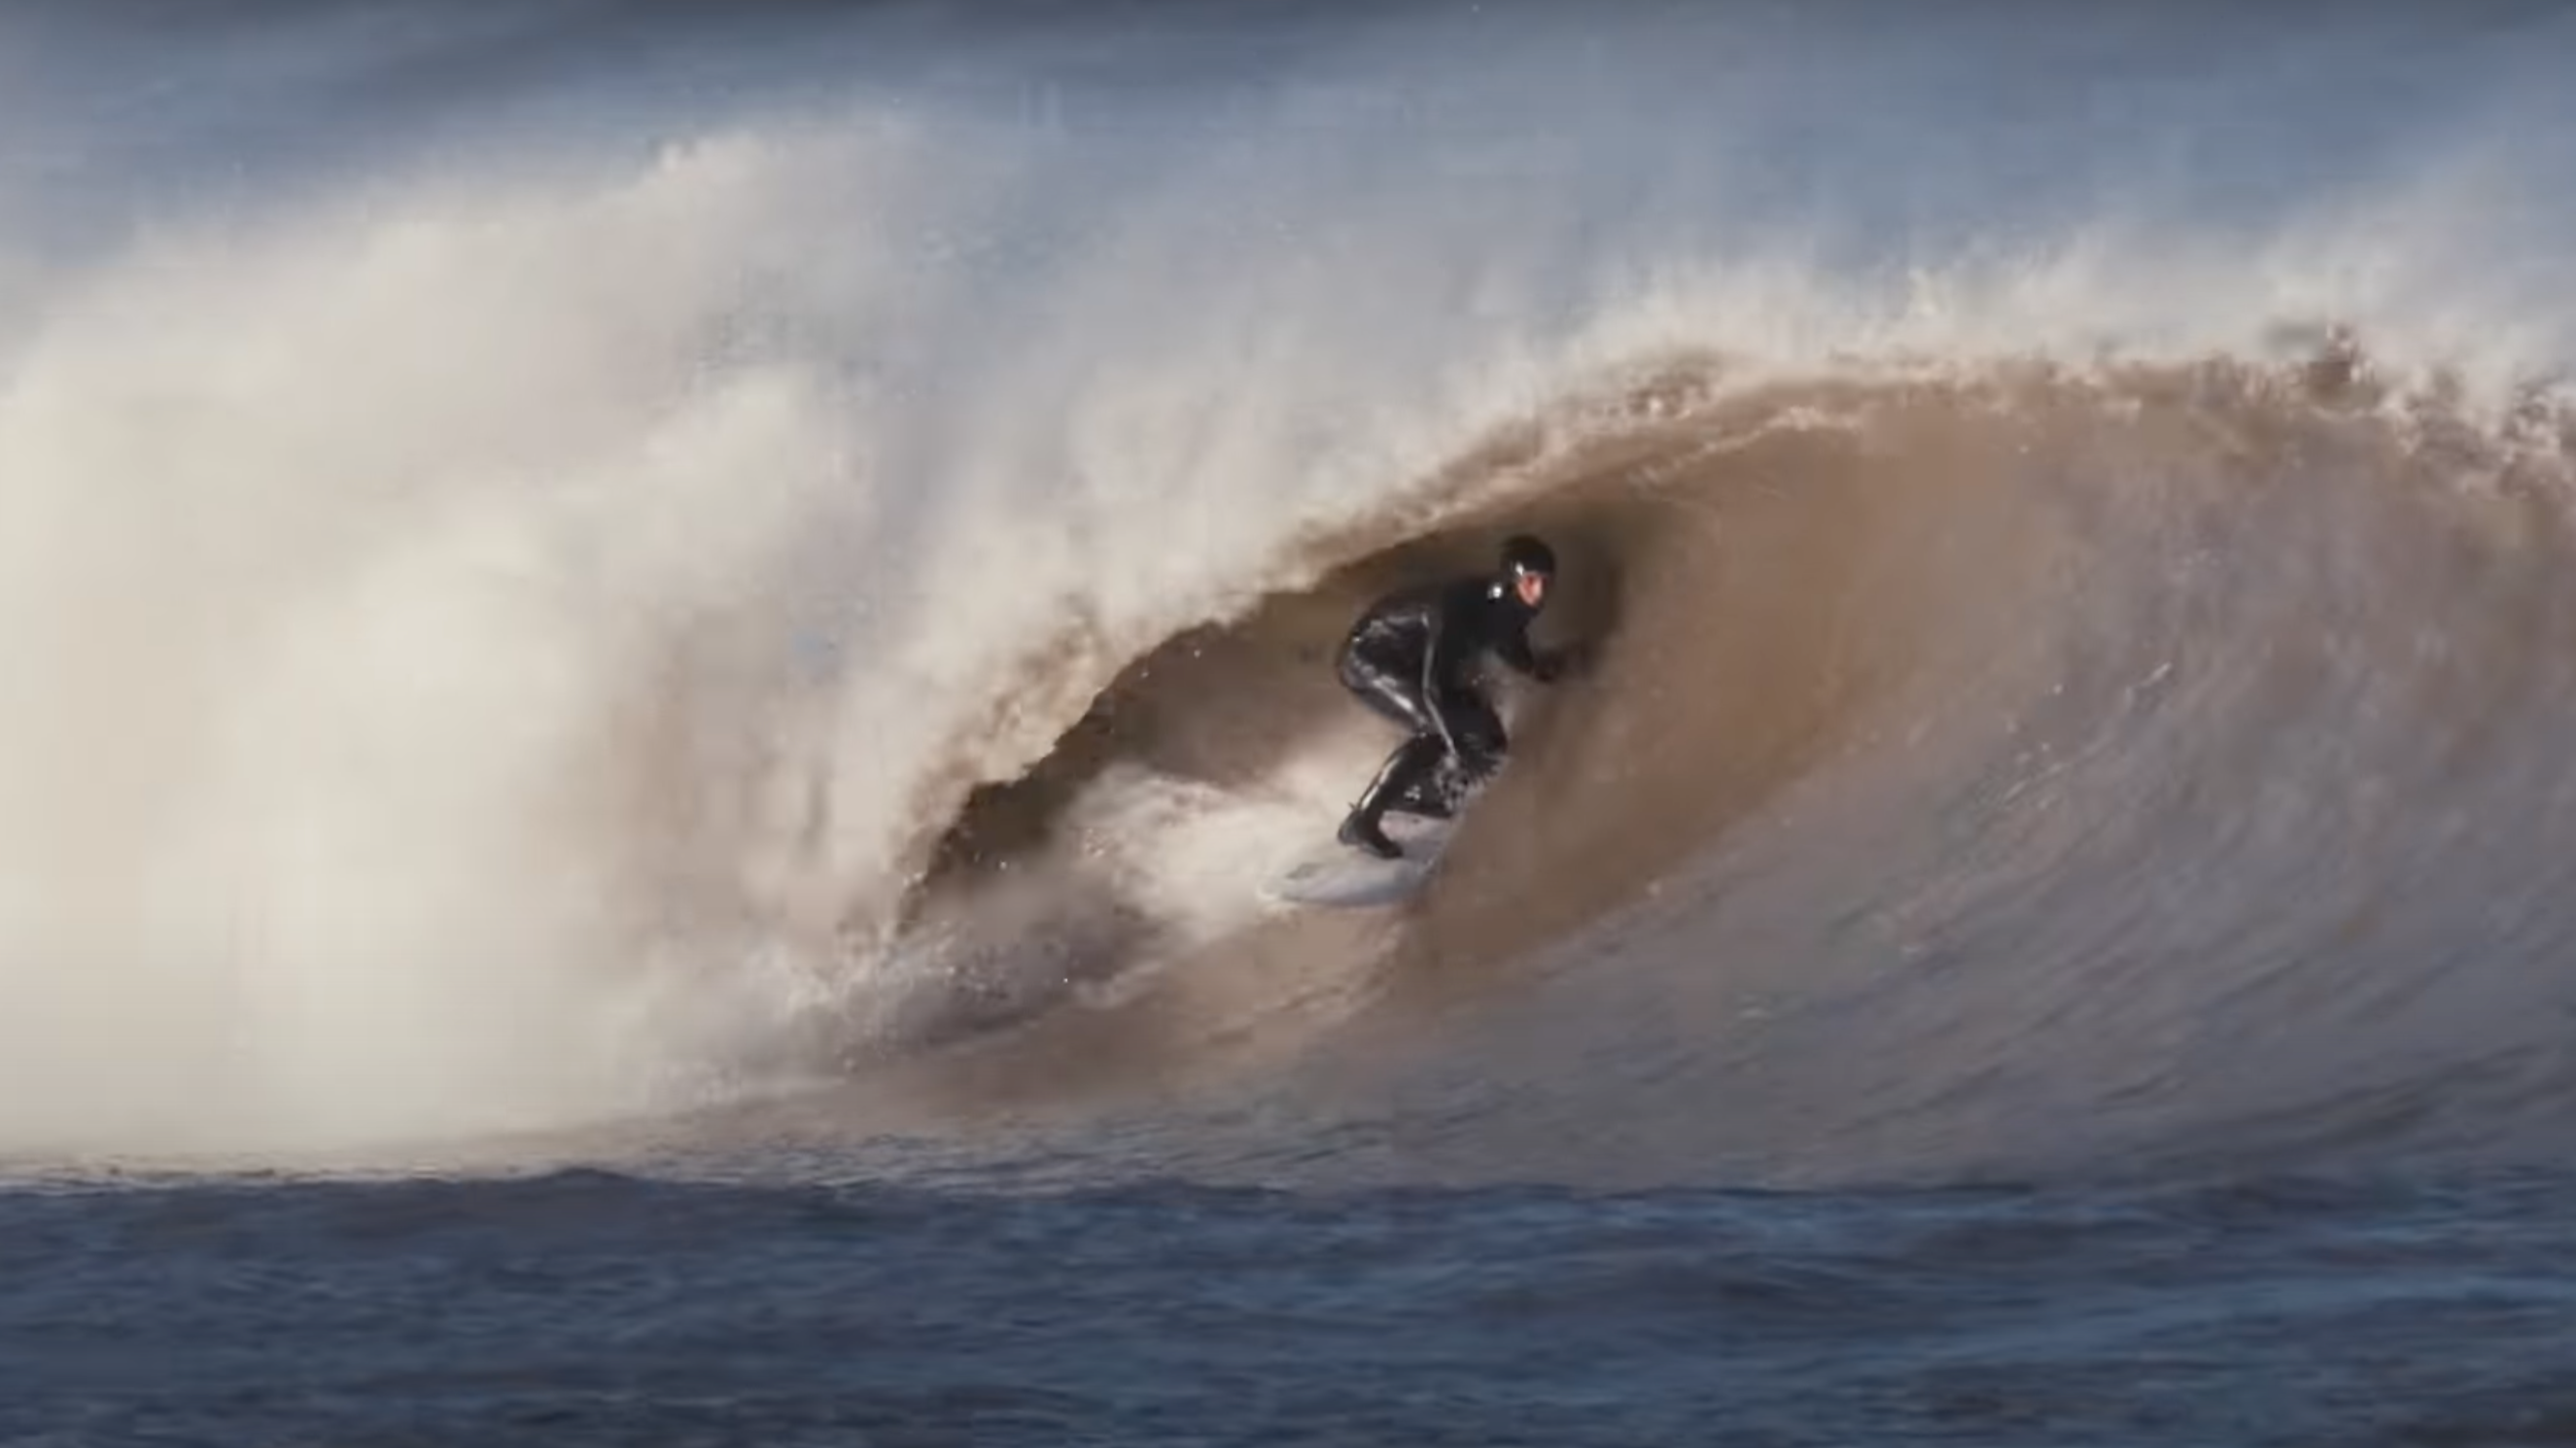 Who told Logan Nicole and Patrick Langdon-Dark at home that there were no waves in Wales?

